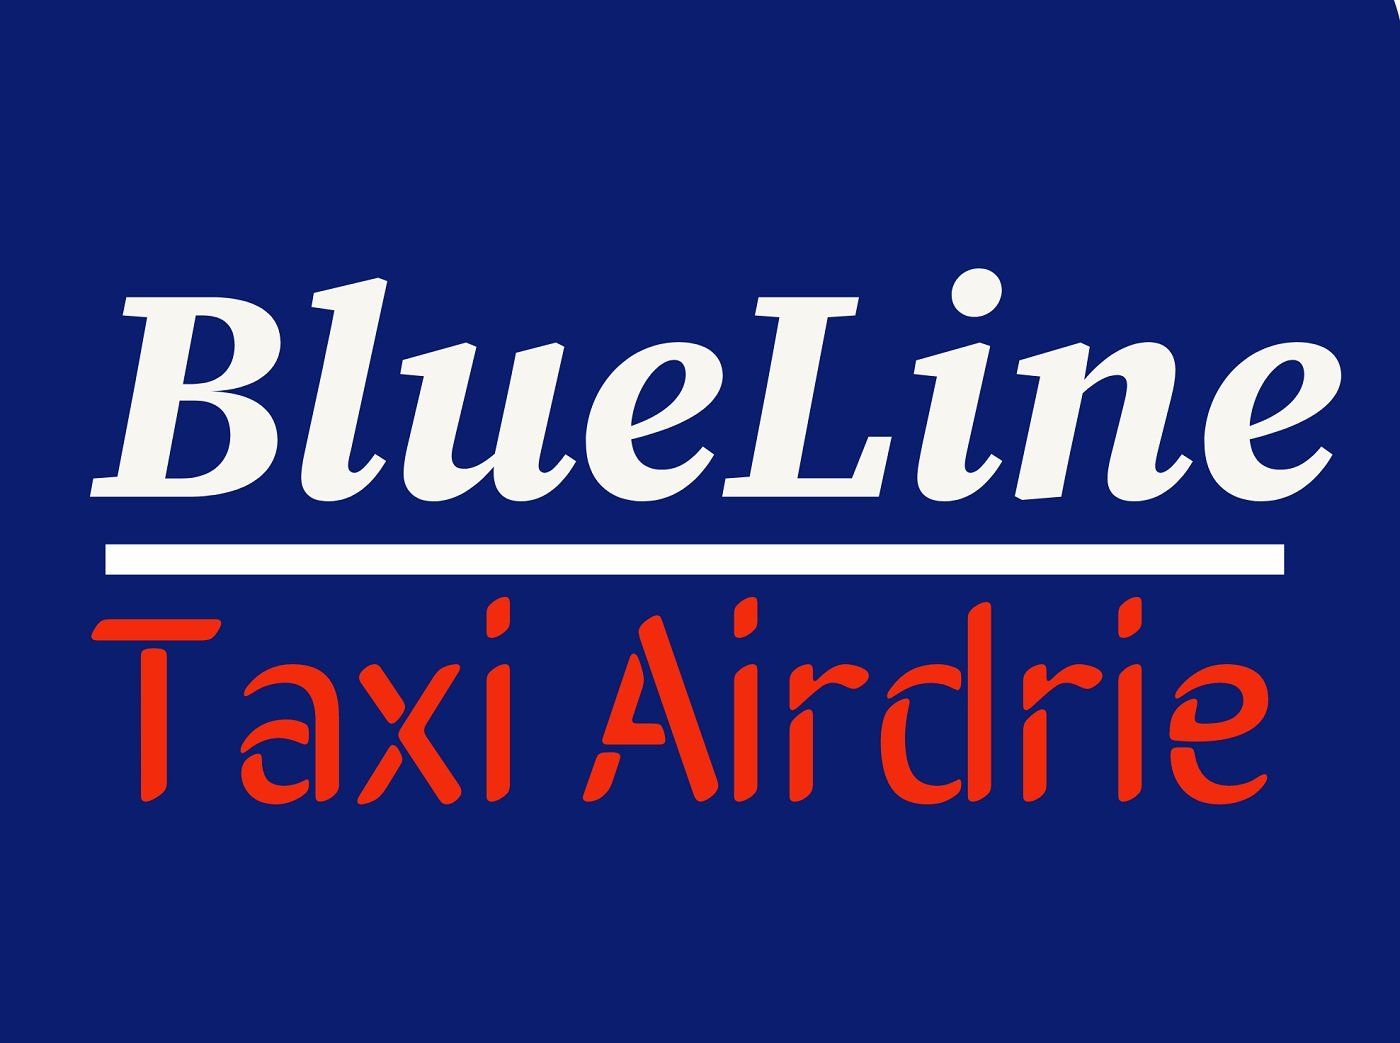 Airdrie taxi services by Blueline cabs in Airdrie, Alberta Canada.